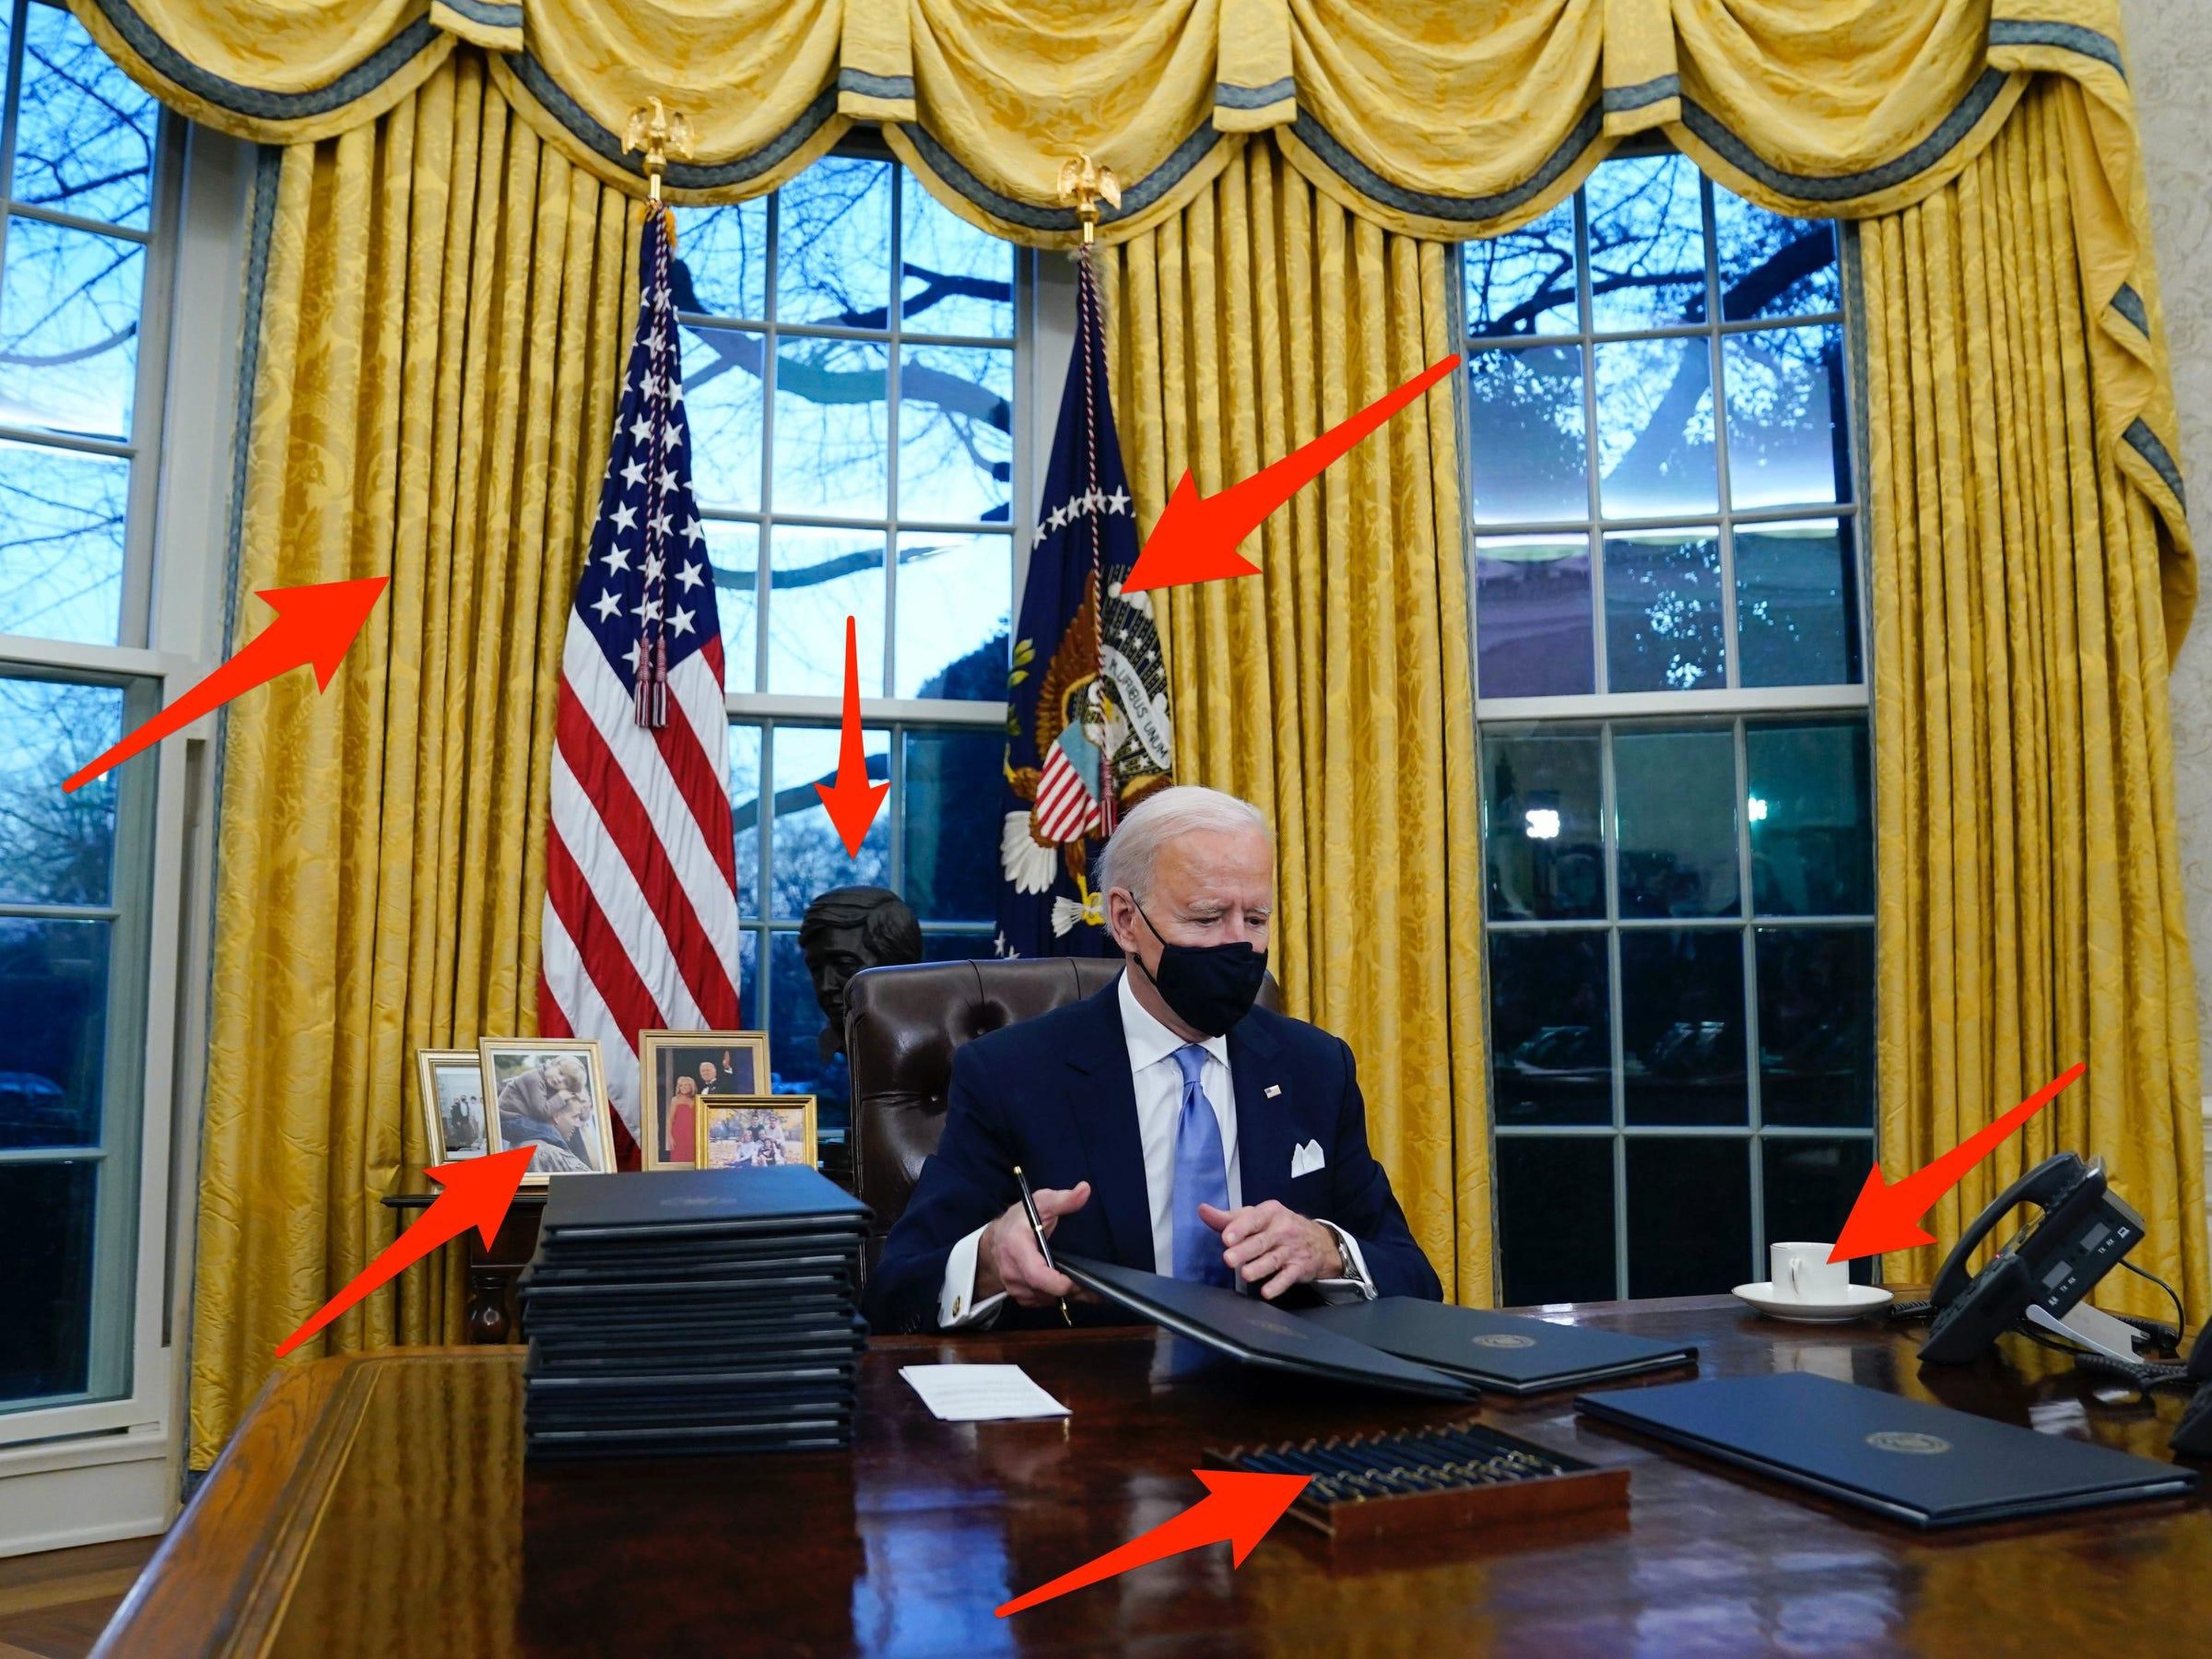 11 hidden meanings behind the personal touches in President Biden's Oval Office you may have missed